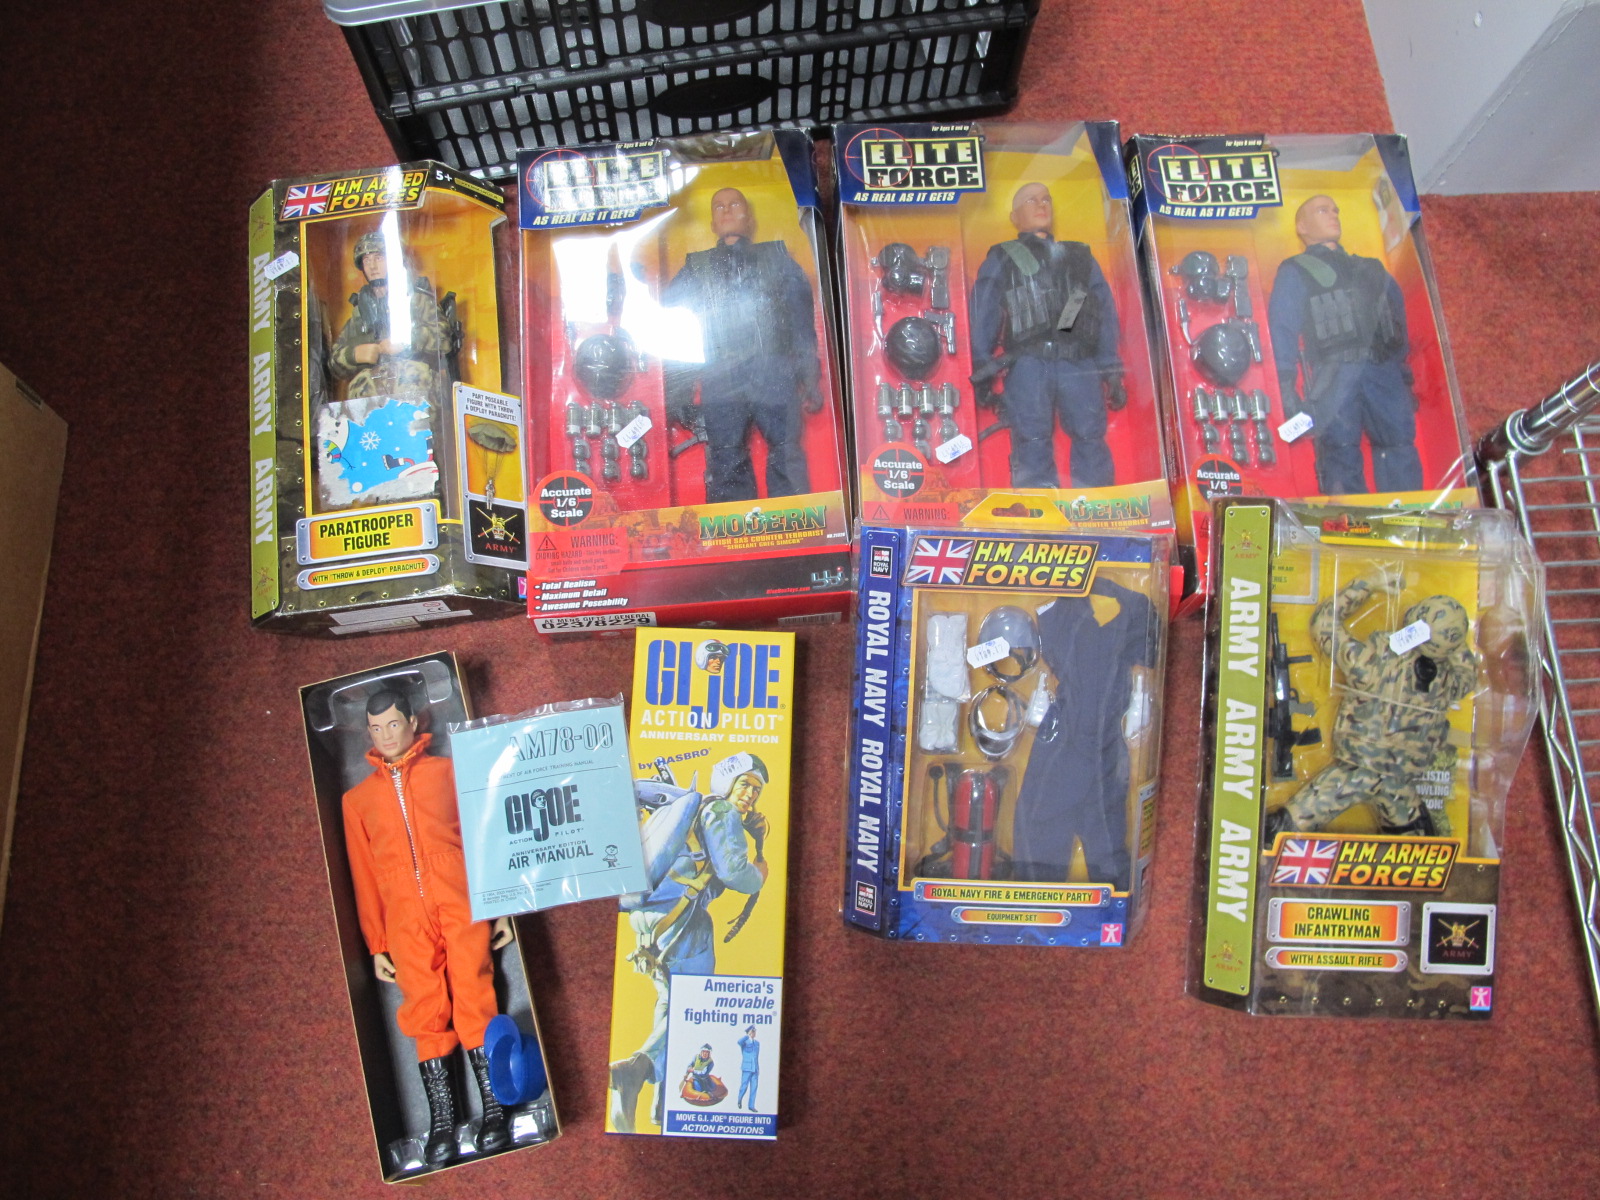 Three Boxed Elite Force Action Figures, with three H.M. Armed Forces and a GI Joe. Boxes poor-good.